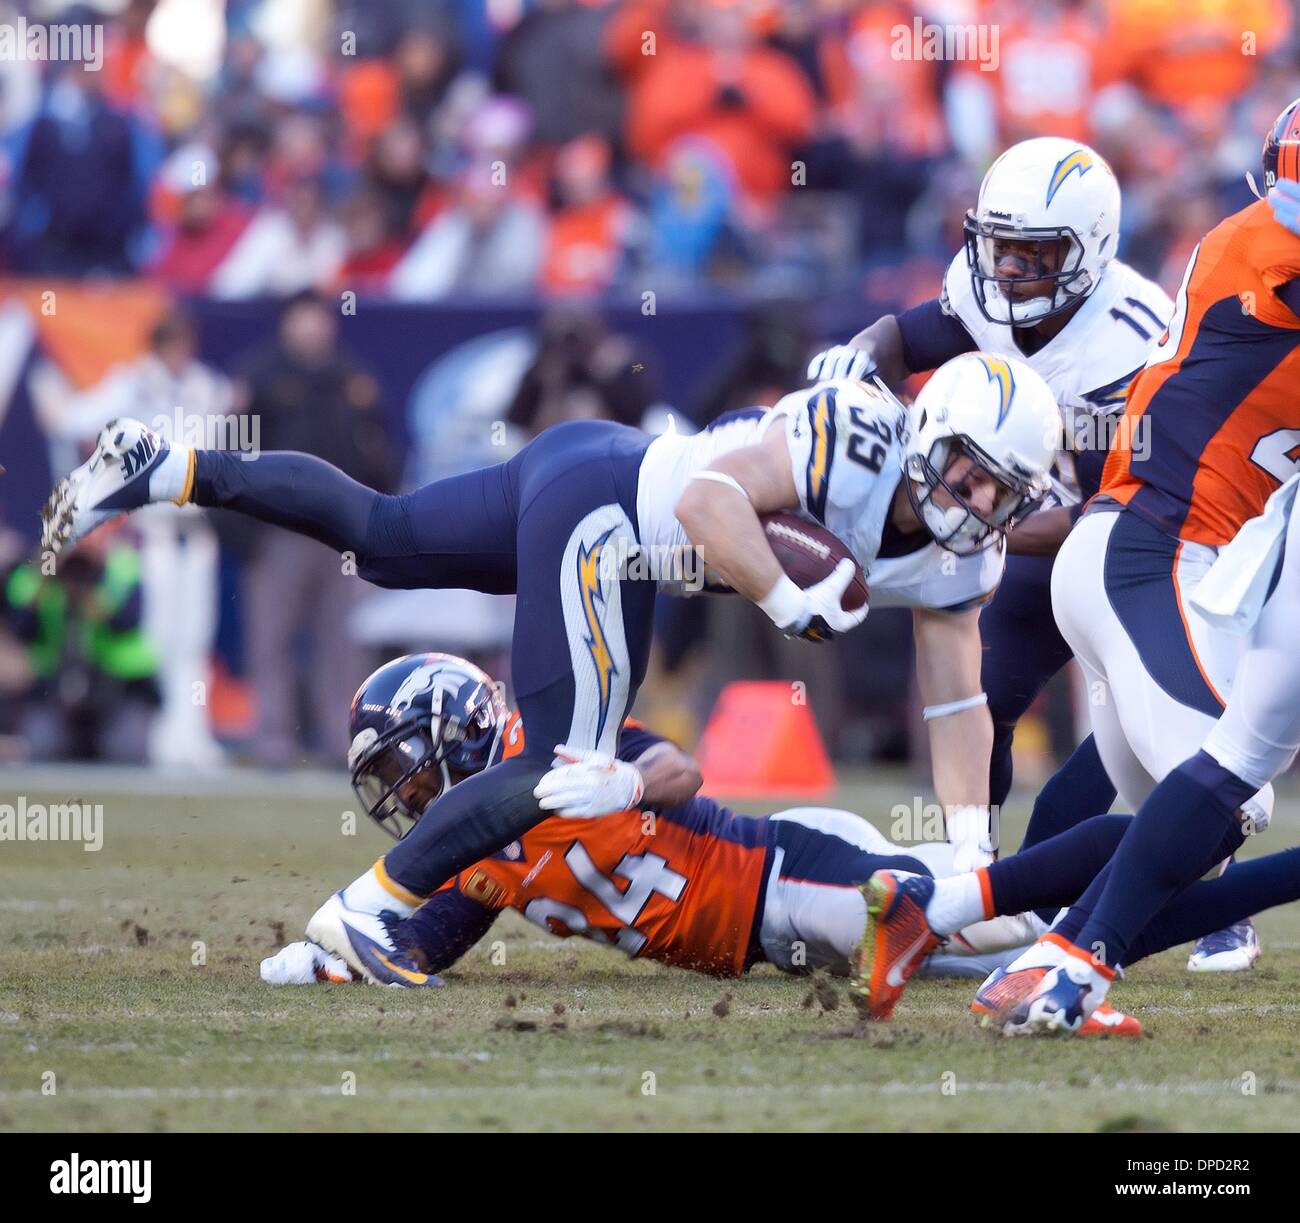 Denver, Colorado, USA. 12th Jan, 2014. Denver, Colorado, USA. 12th Jan, 2014. Chargers RB DANNY WOODHEAD, center, gets tackled by Broncos CB CHAMP BAILEY, bottom, during the 1st. half at Sports Authority Field at Mile High Sunday afternoon. The Broncos beat the Chargers 24-17. Credit:  Hector Acevedo/ZUMAPRESS.com/Alamy Live News Stock Photo